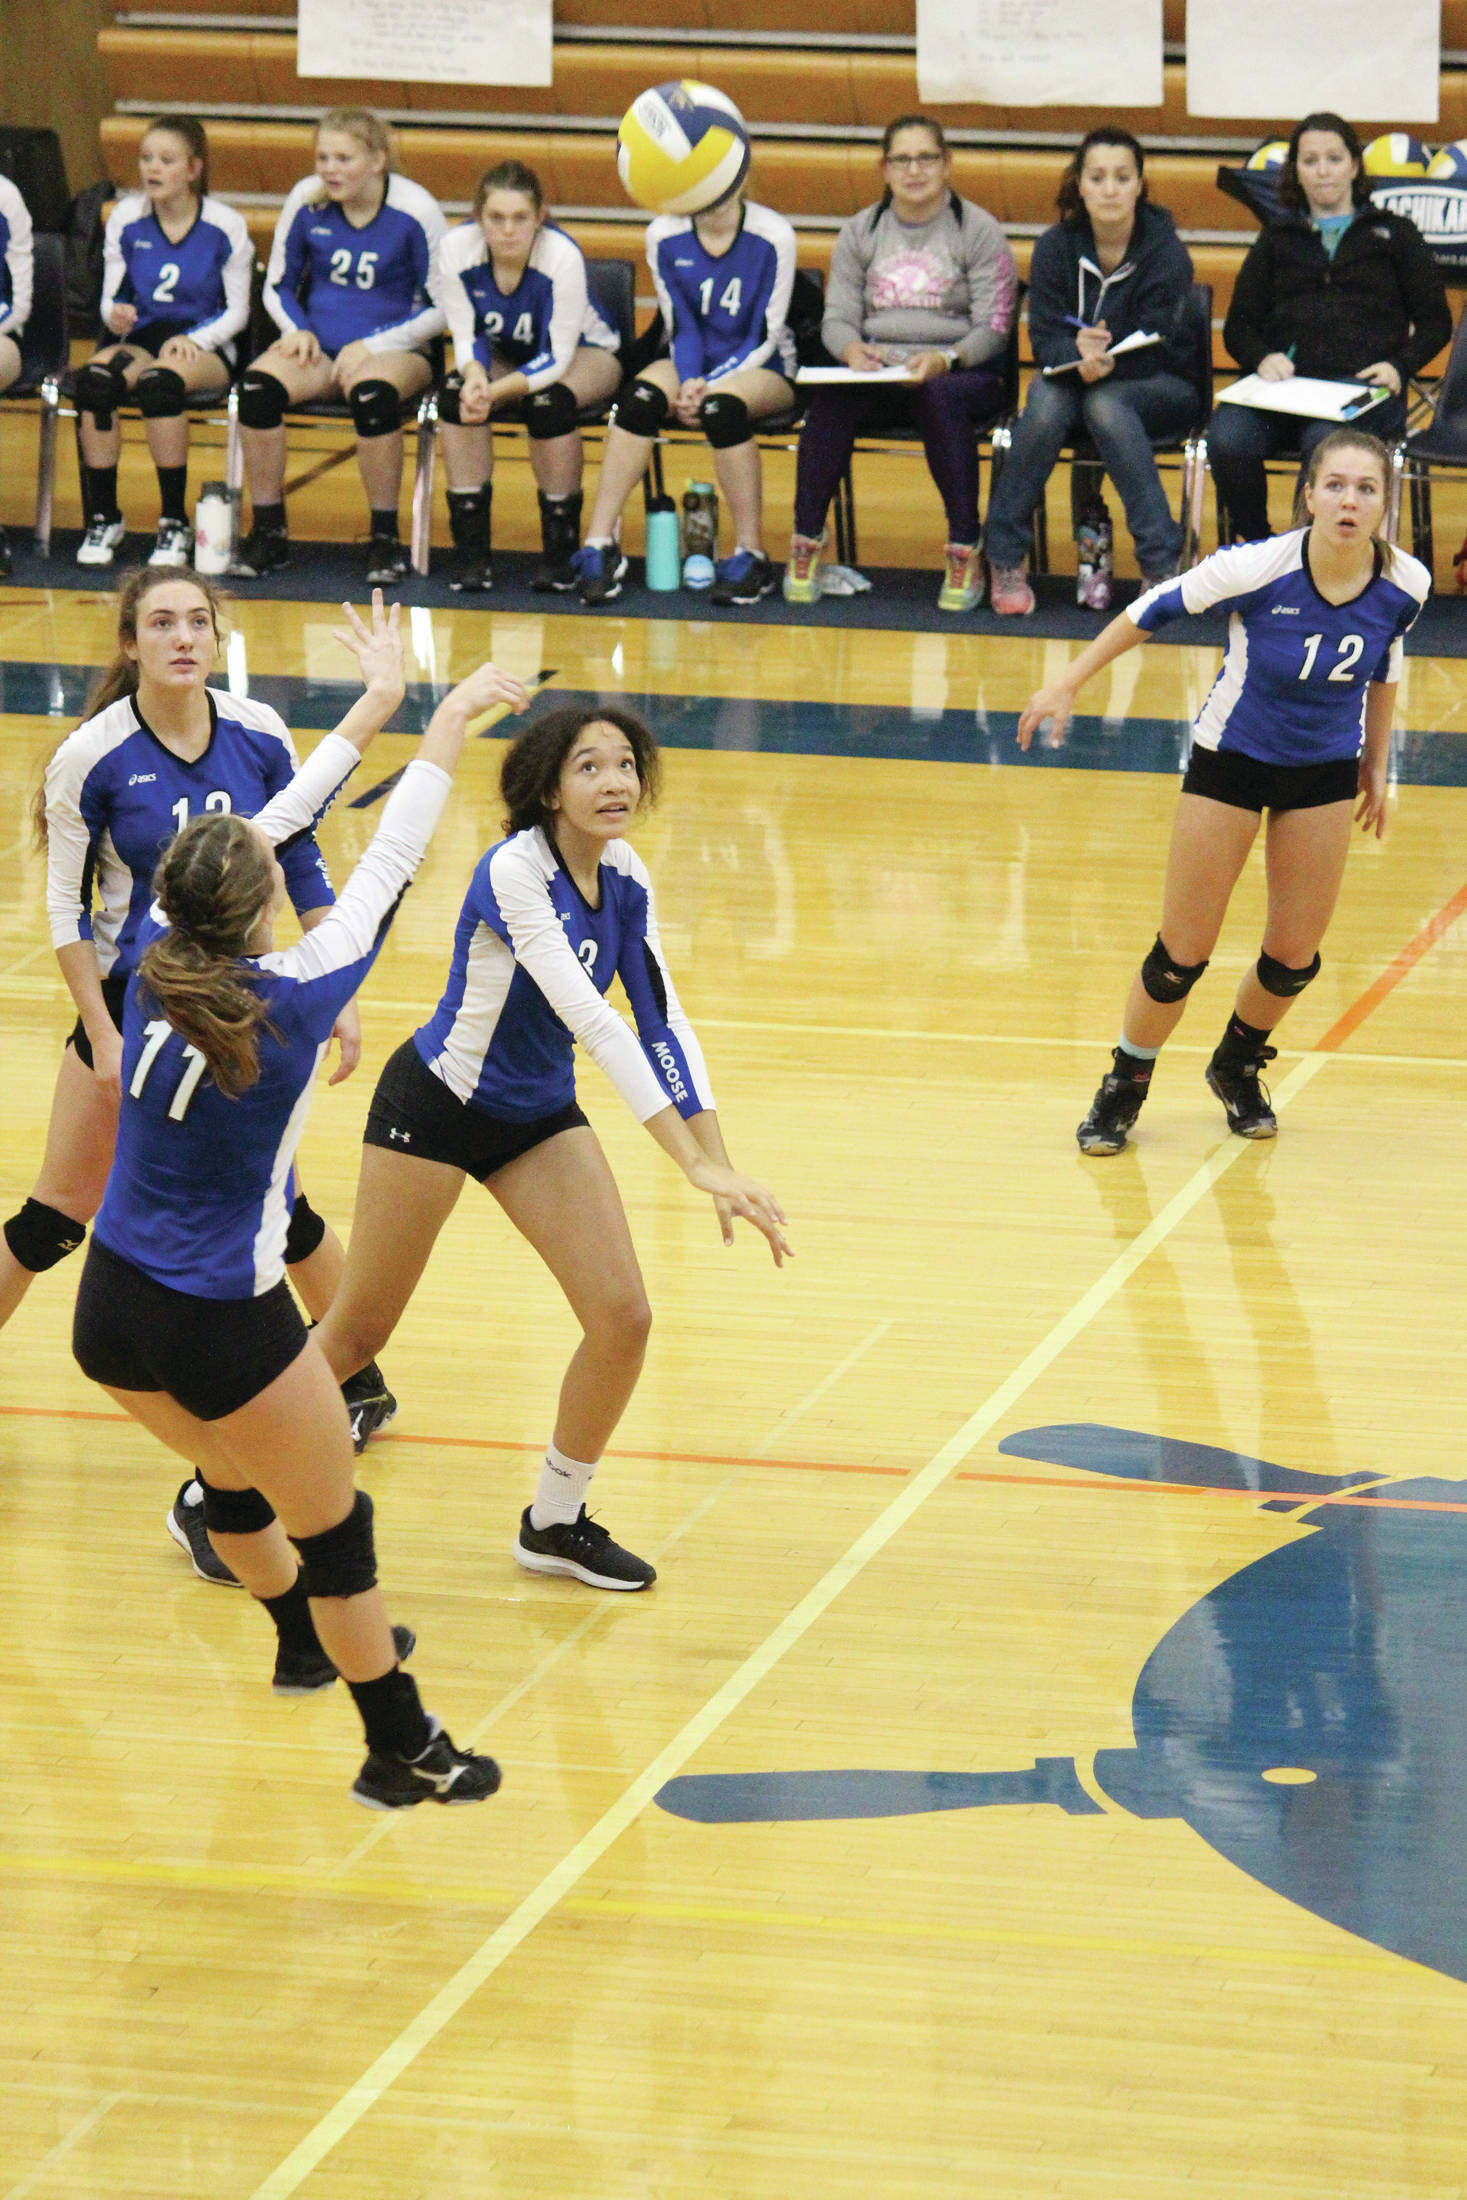 Palmer’s Kelsey Giese sets the ball to teammate Kristen Beames (No. 12) during a Thursday, Sept. 12, volleyball game against Homer High School in the Alice Witte Gymnasium.